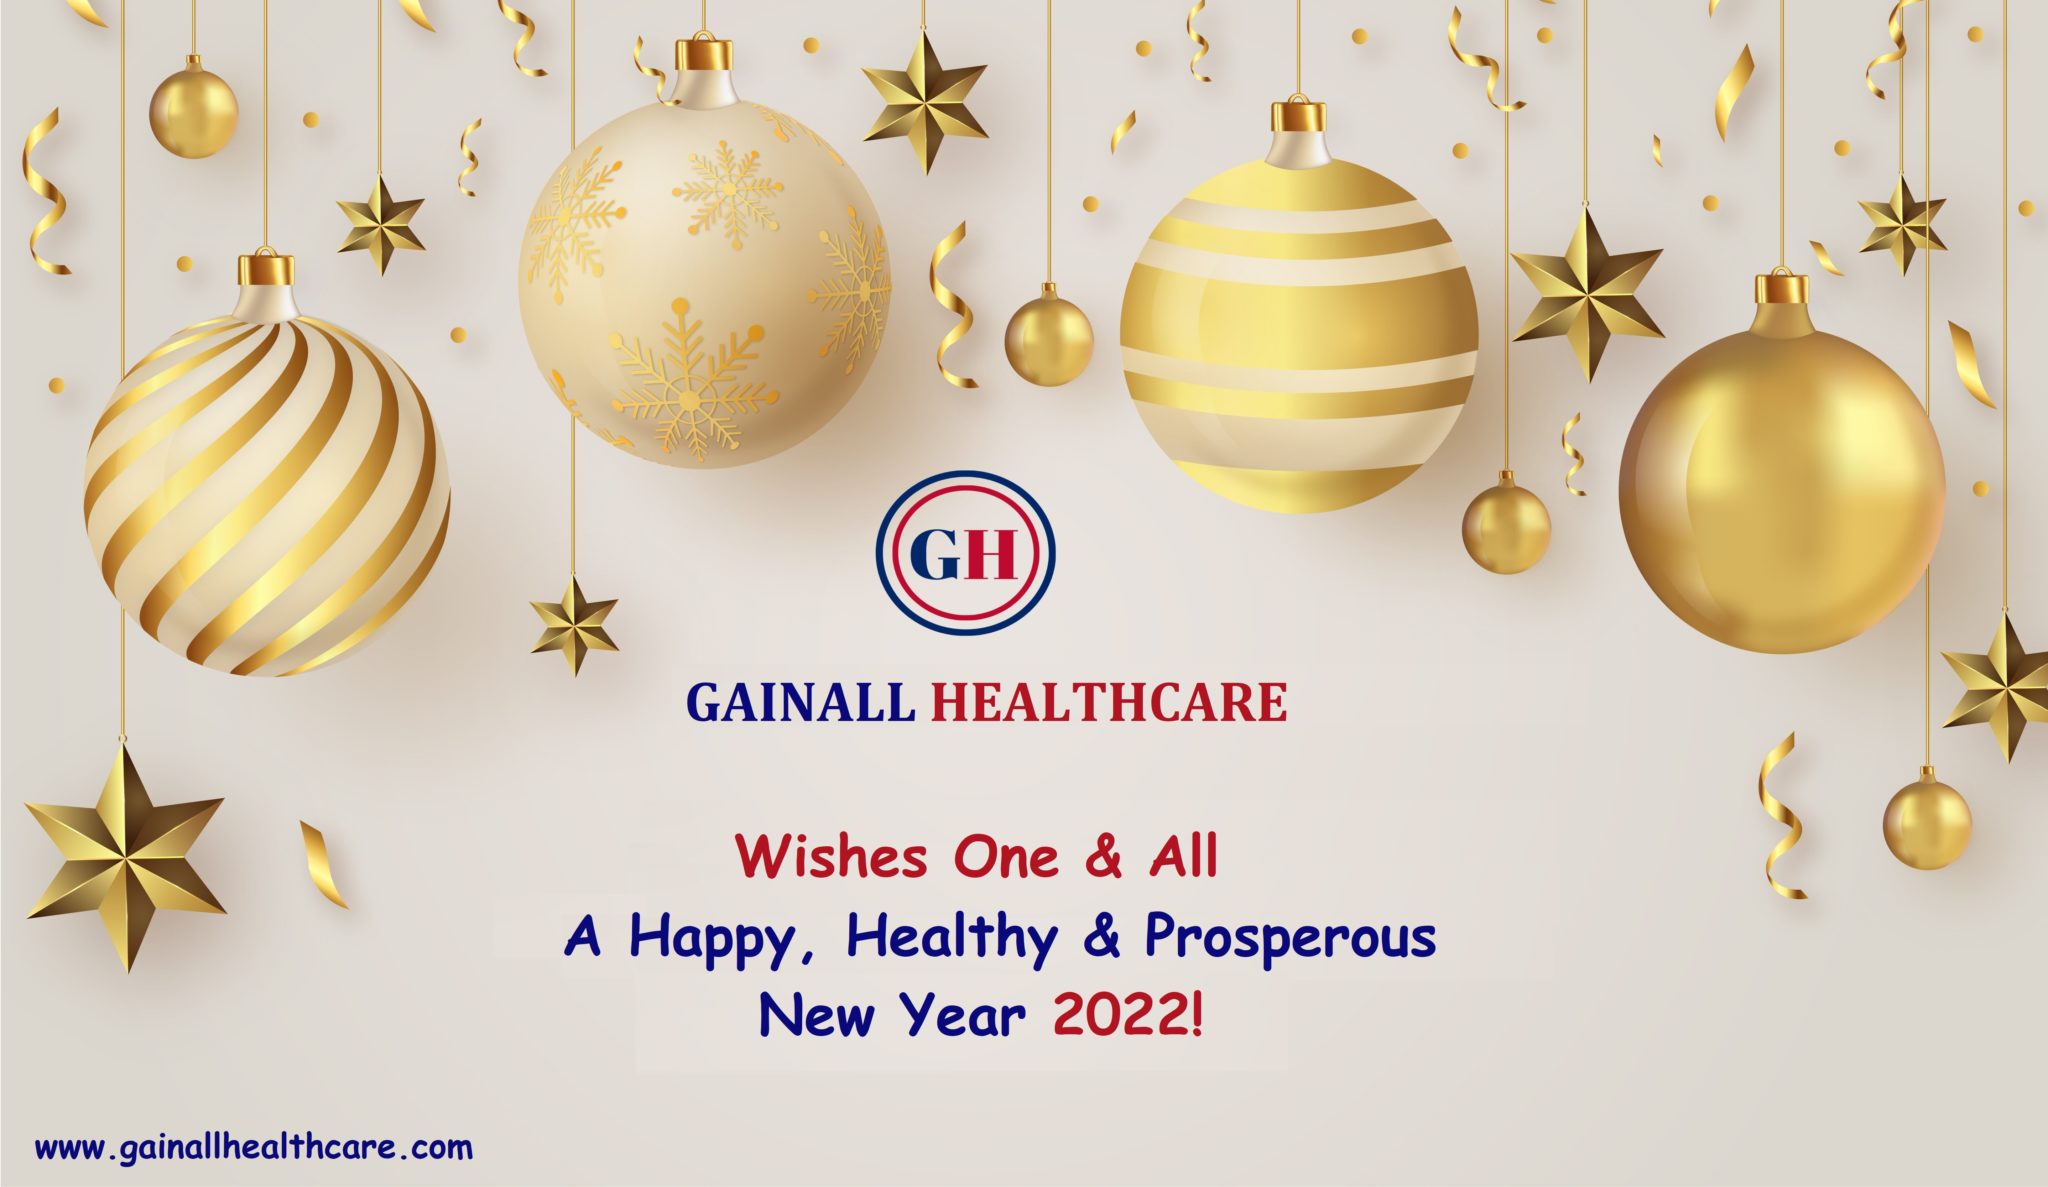 Gainall Healthcare - Happy New Year 2022